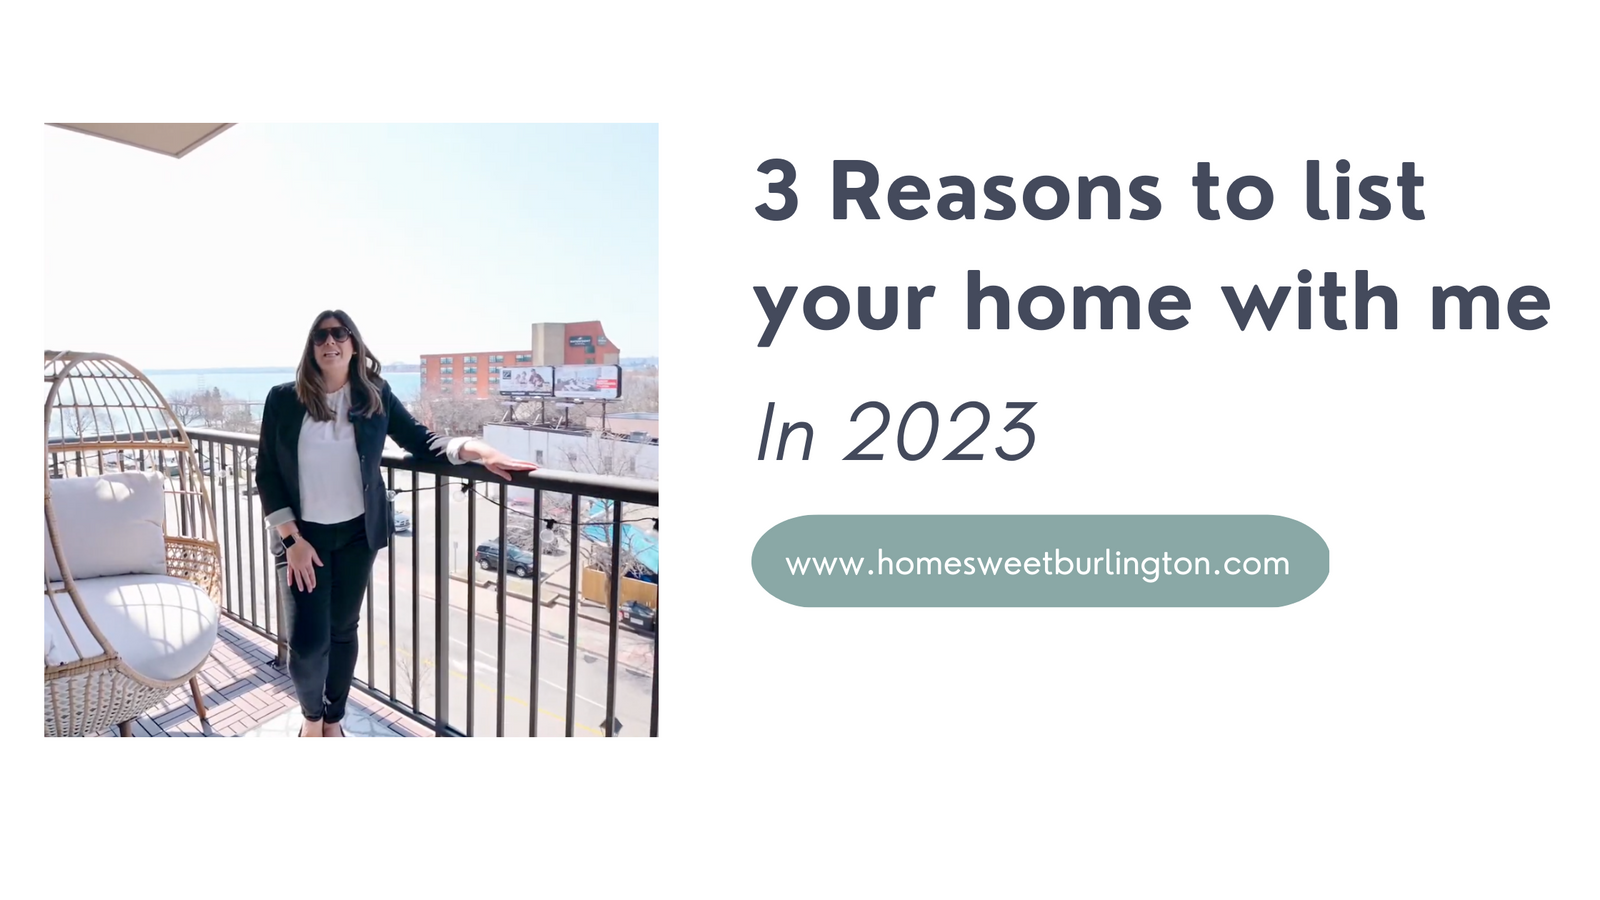 3 Reasons to list your home with me in 2023